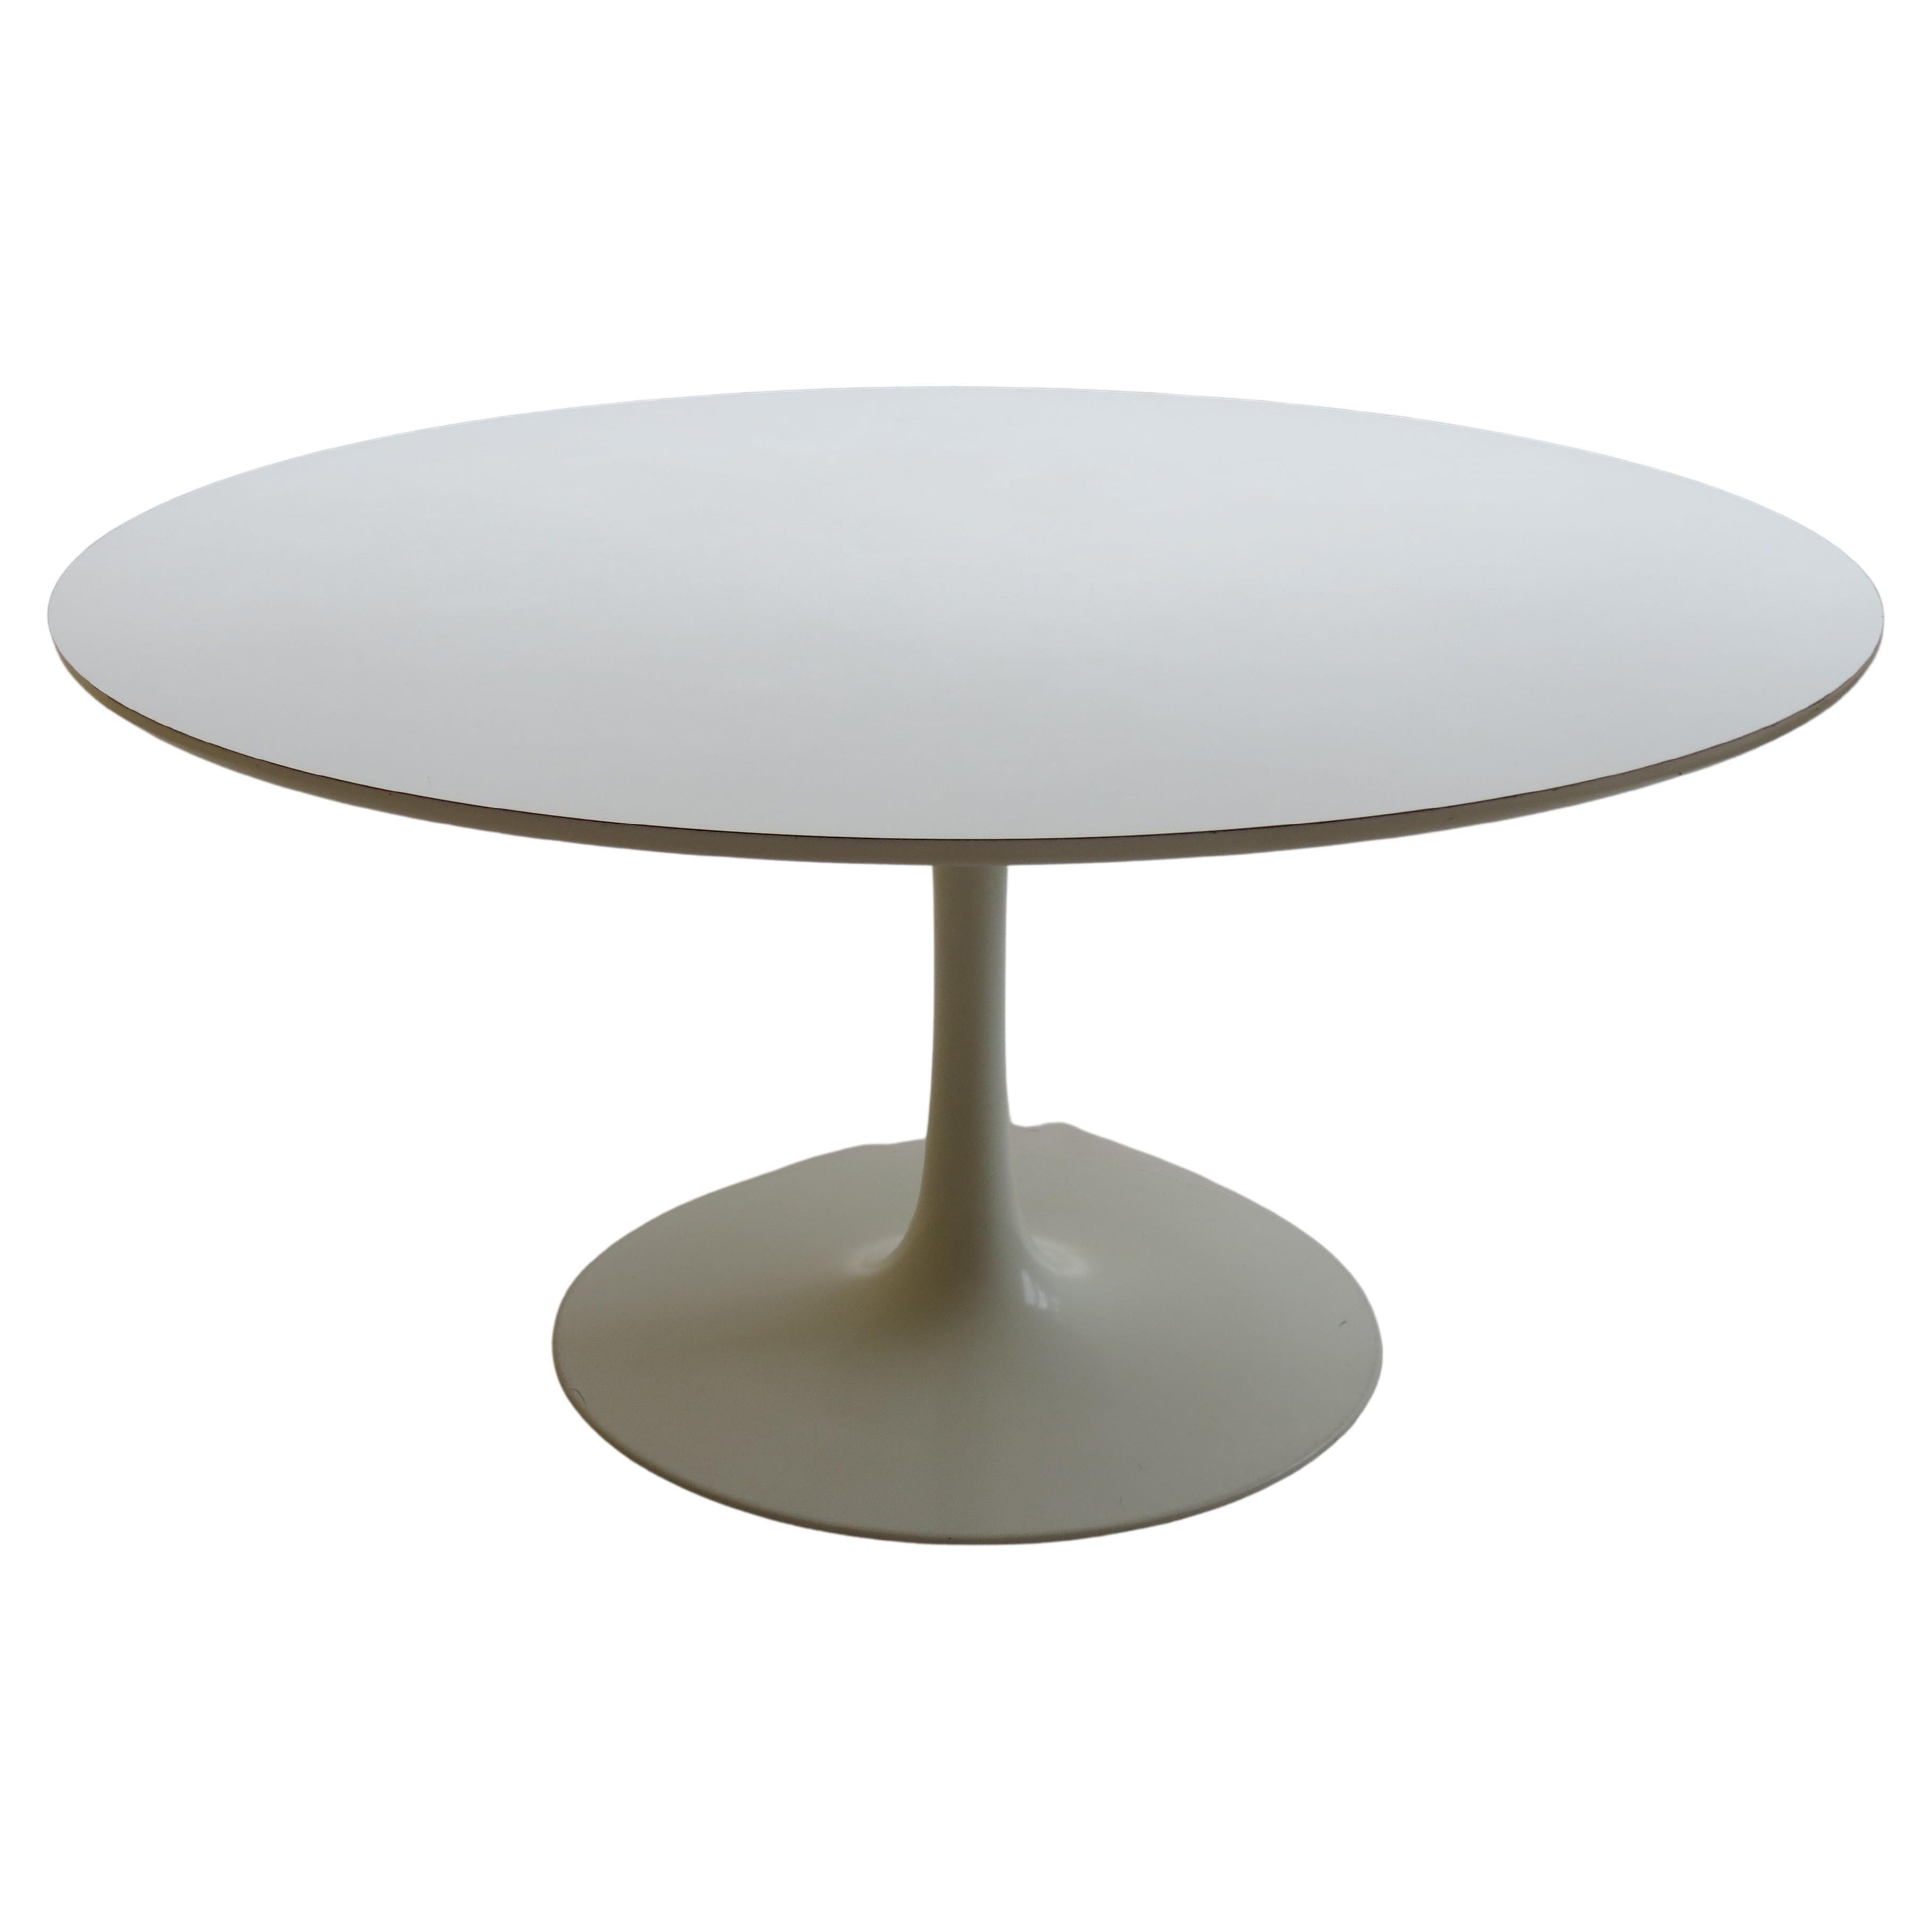 1960s Tulip Dining Table designed by Maurice Burke for Arkana